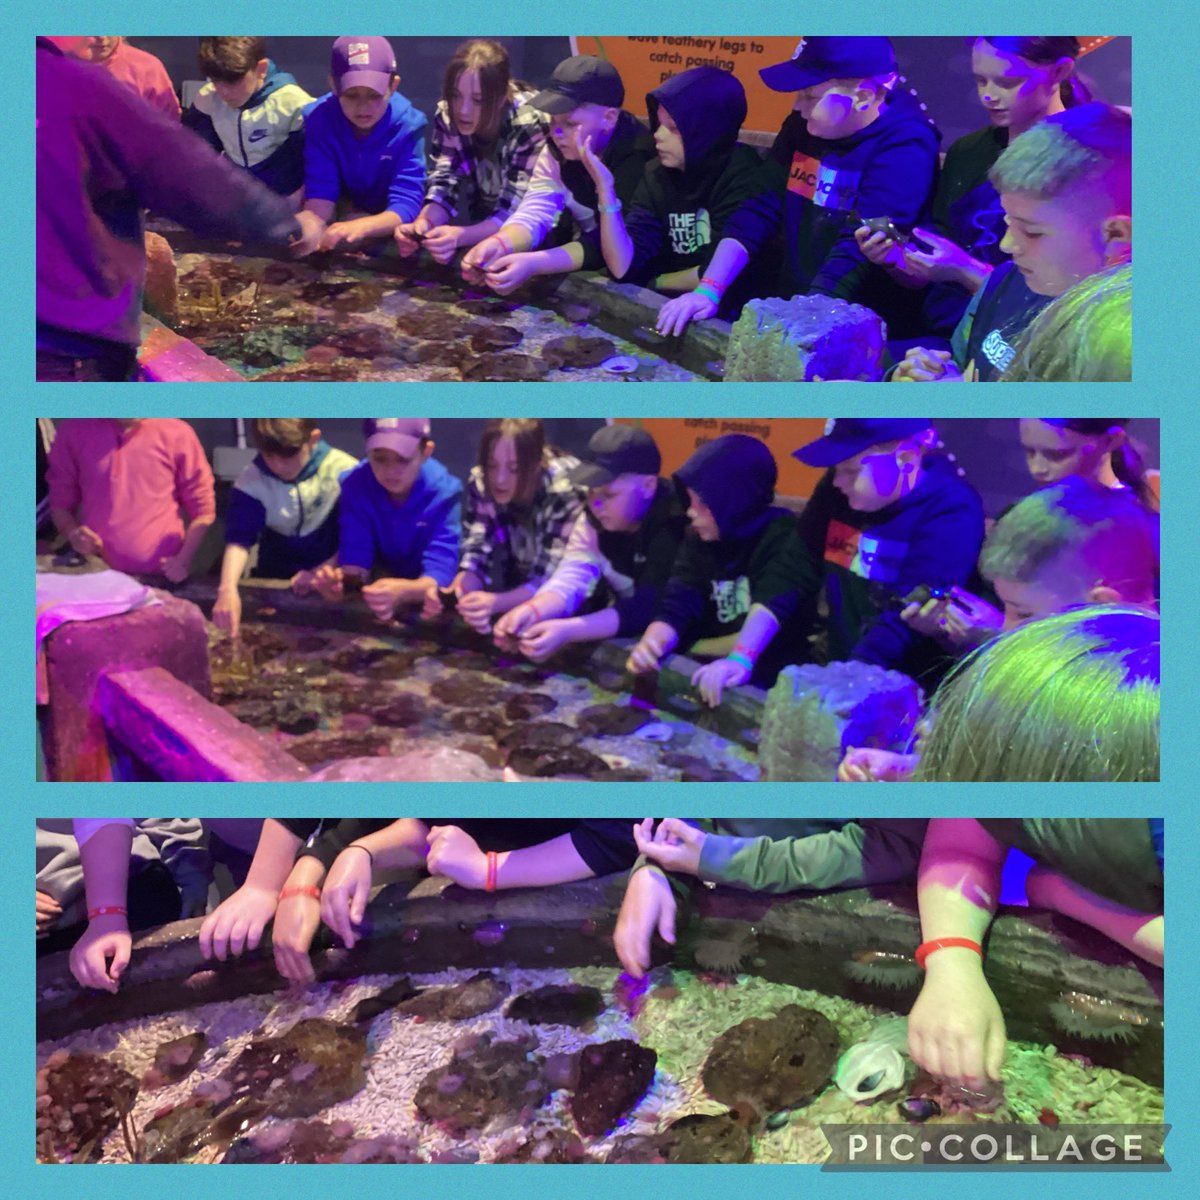 @BandBschool What a busy day part 1. A long walk and Sealife @eboractrust #bandbresidential #opportunities